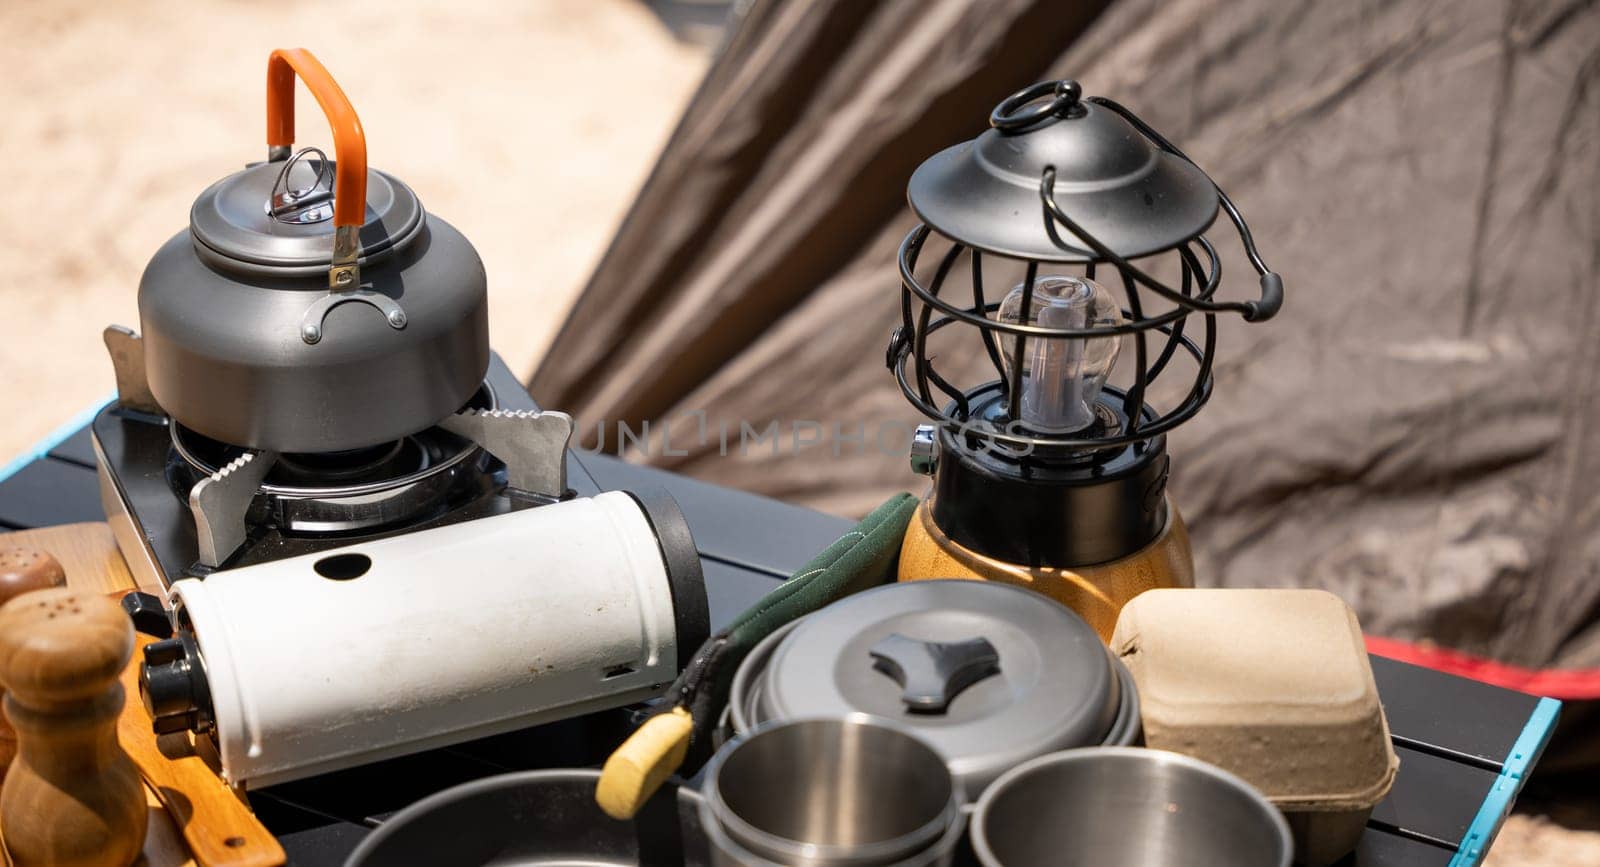 Cooking gear for a tranquil beach campsite, kettle, pot, pan, gas stove, flashlight, and camera set on a table by the tent. Enjoy a serene camping experience amidst nature. by Sorapop